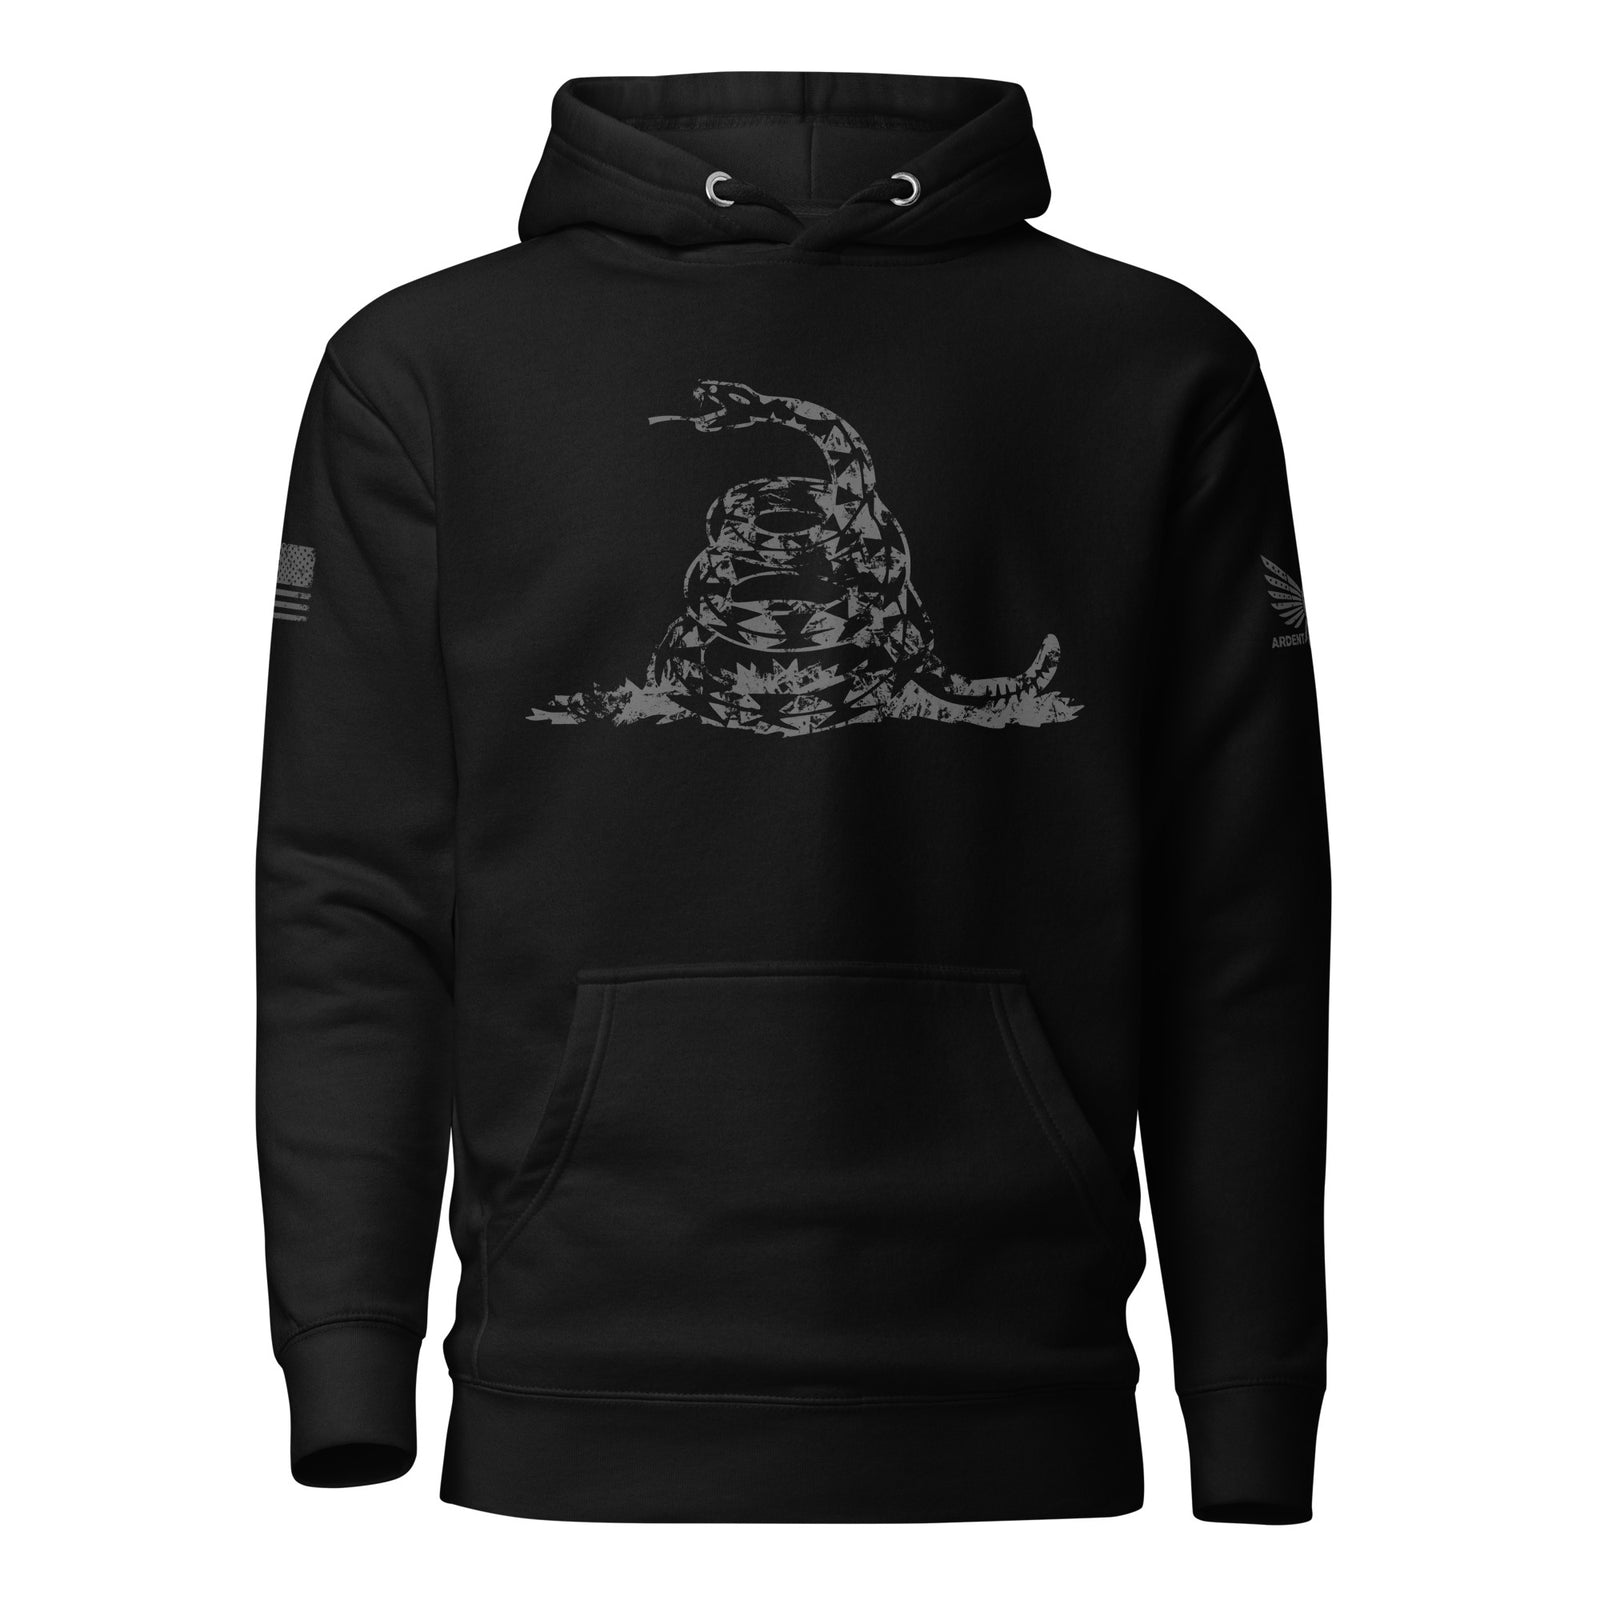 Don't Tread On Me (Black Edition) Hoodie-Premium Hoodie-S-Ardent Patriot Apparel Co.